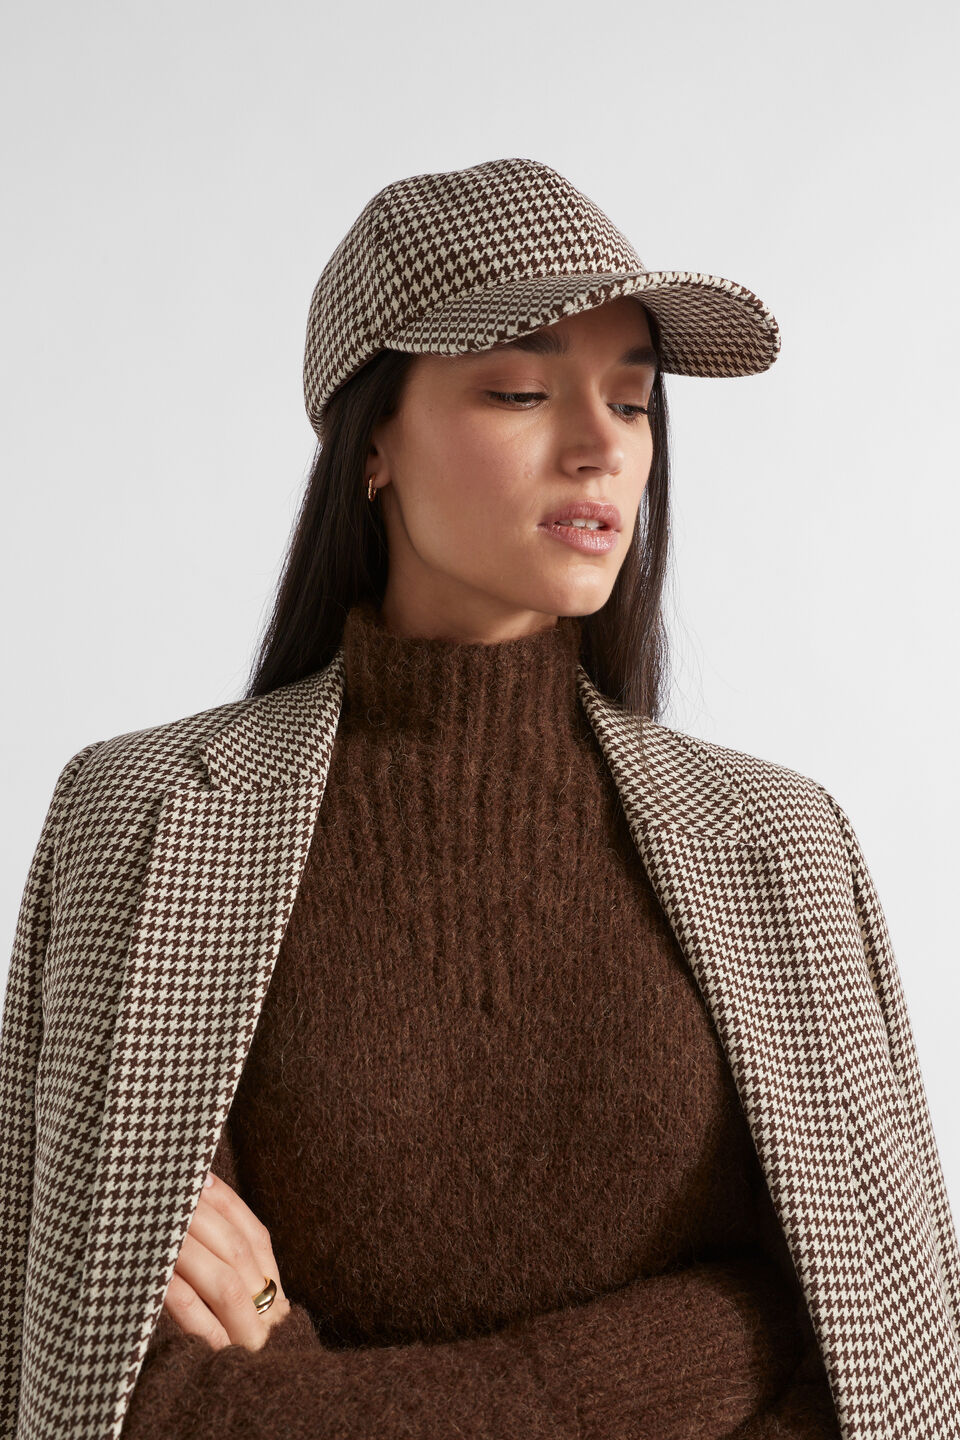 Houndstooth Cap  Hot Chocolate Houndstooth